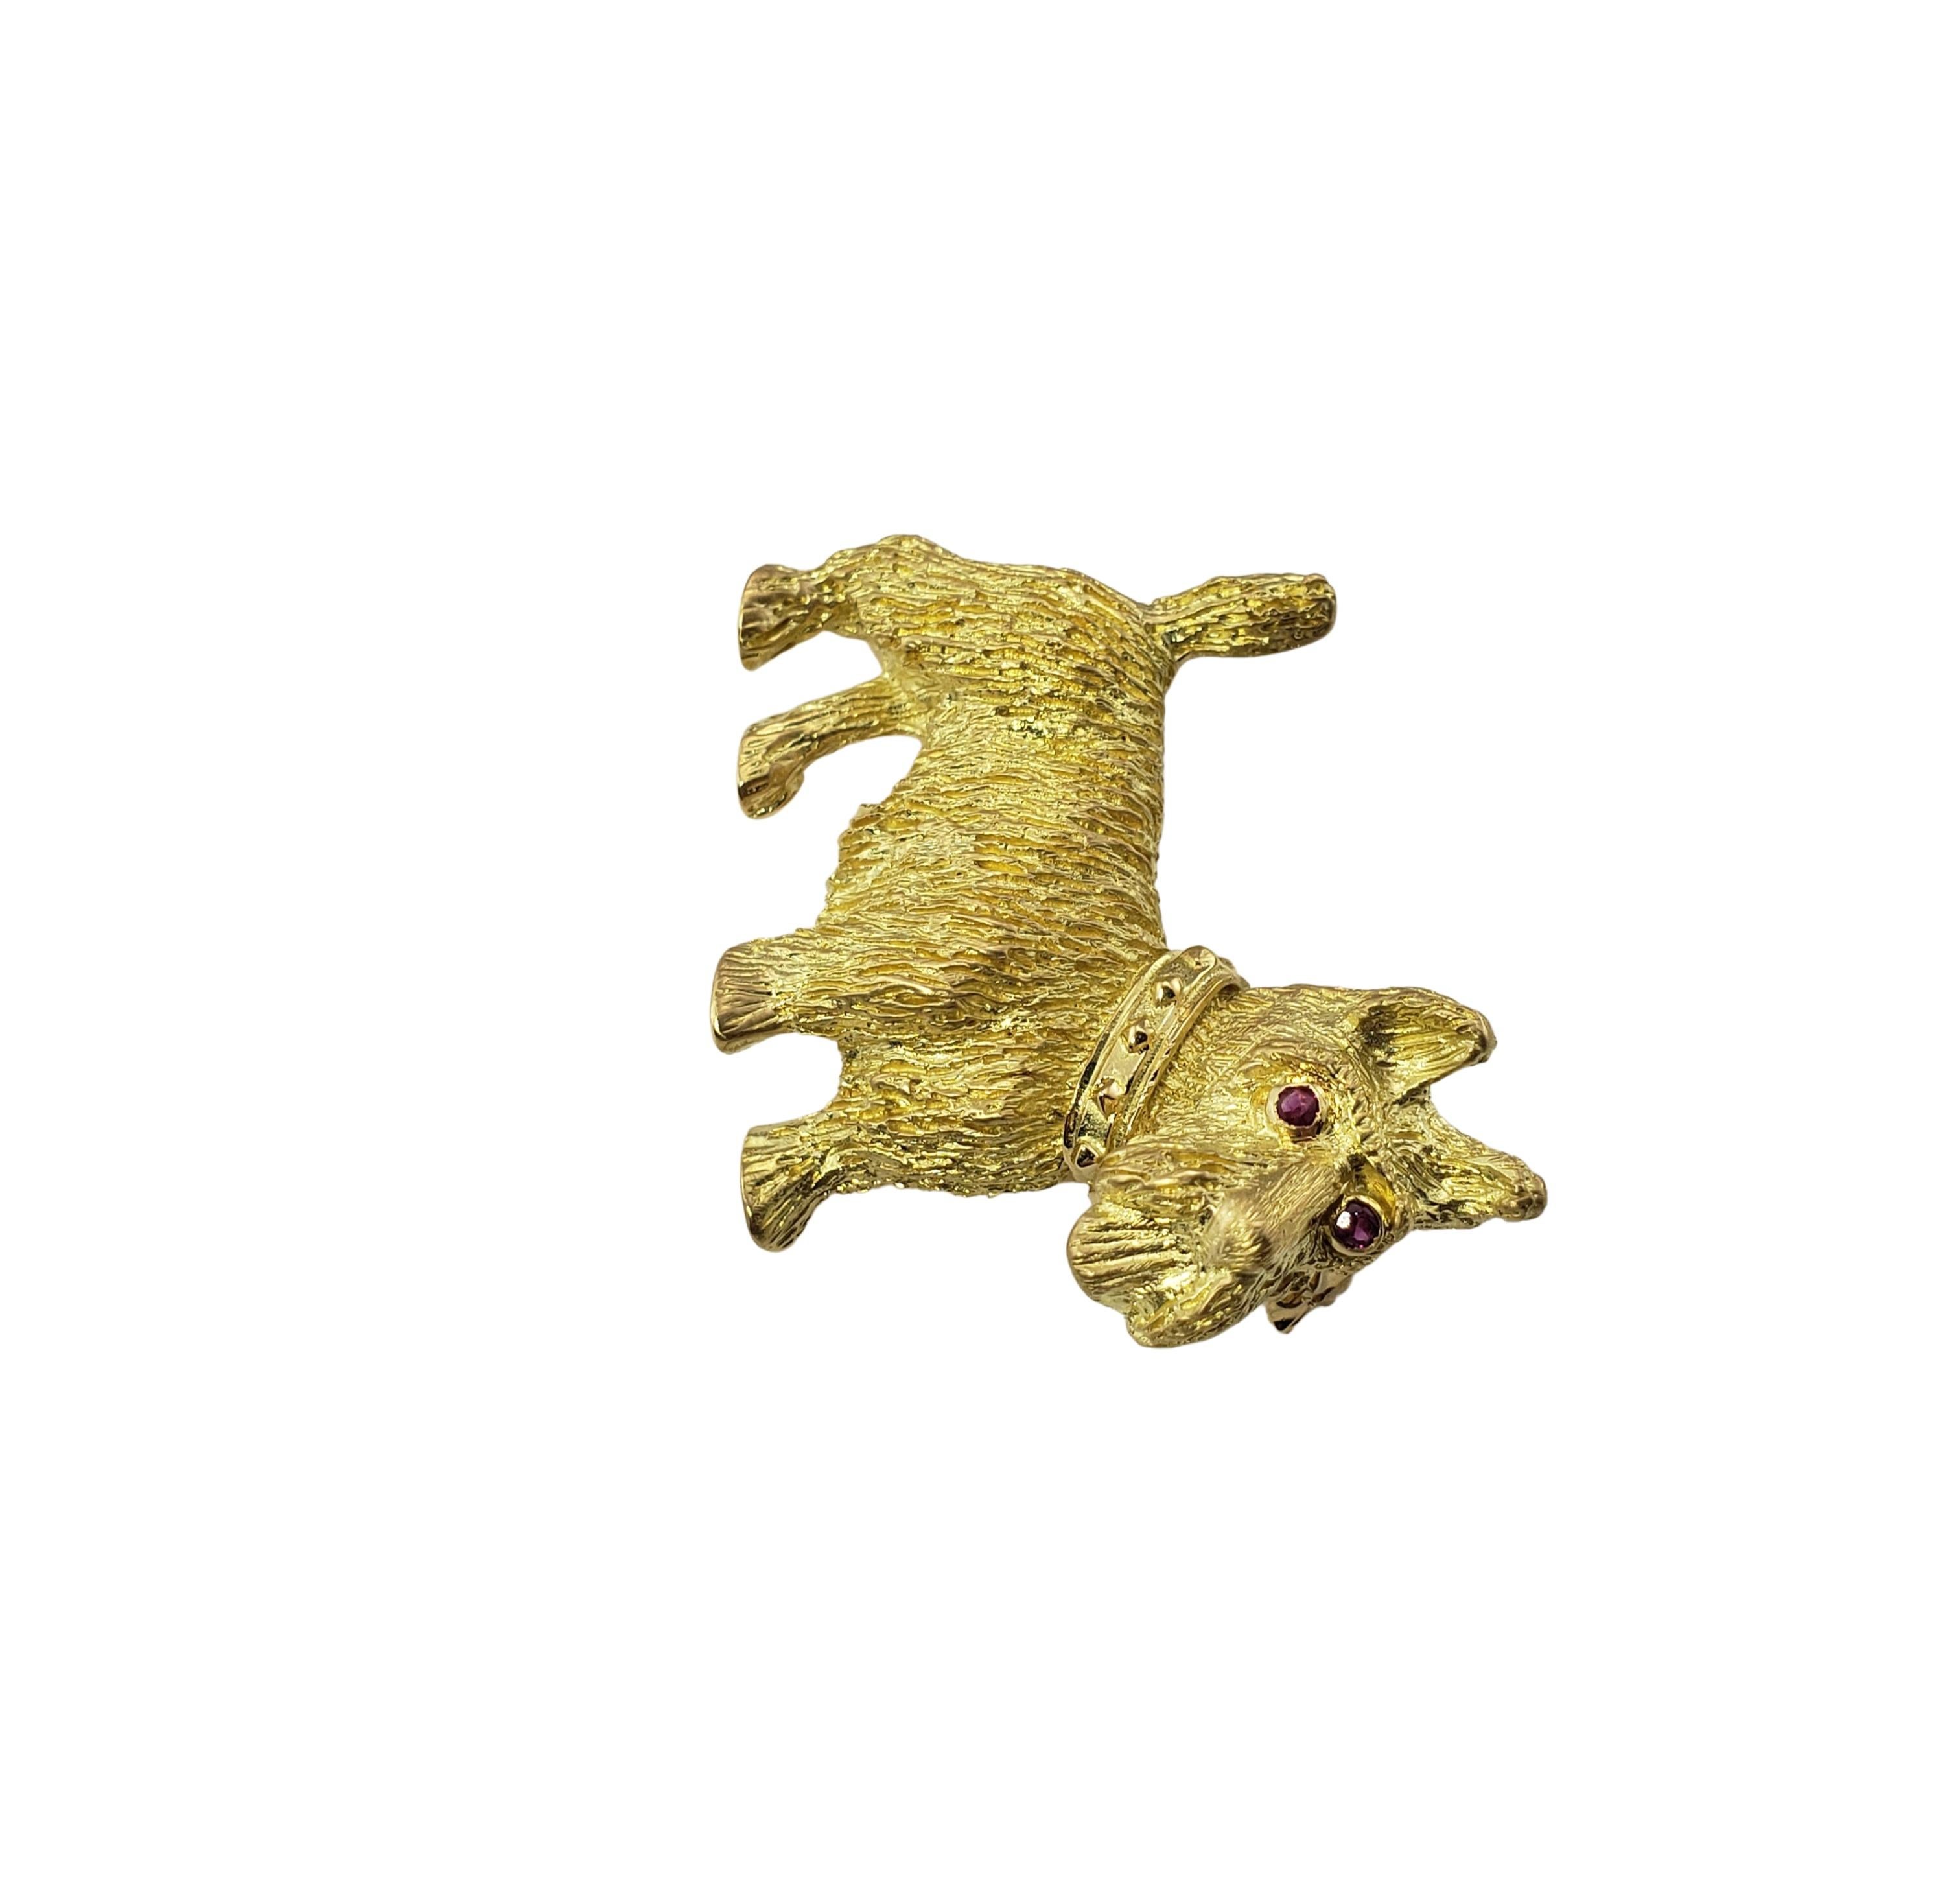 Vintage 18 Karat Yellow Gold and Ruby Scottish Terrier Brooch/Pin-

This beautifully crafted 18K yellow gold brooch features a meticulously detailed Scottish Terrier accented with two ruby eyes.

Size: 35 mm x 29 mm (Width x Height)

Weight: 7.7